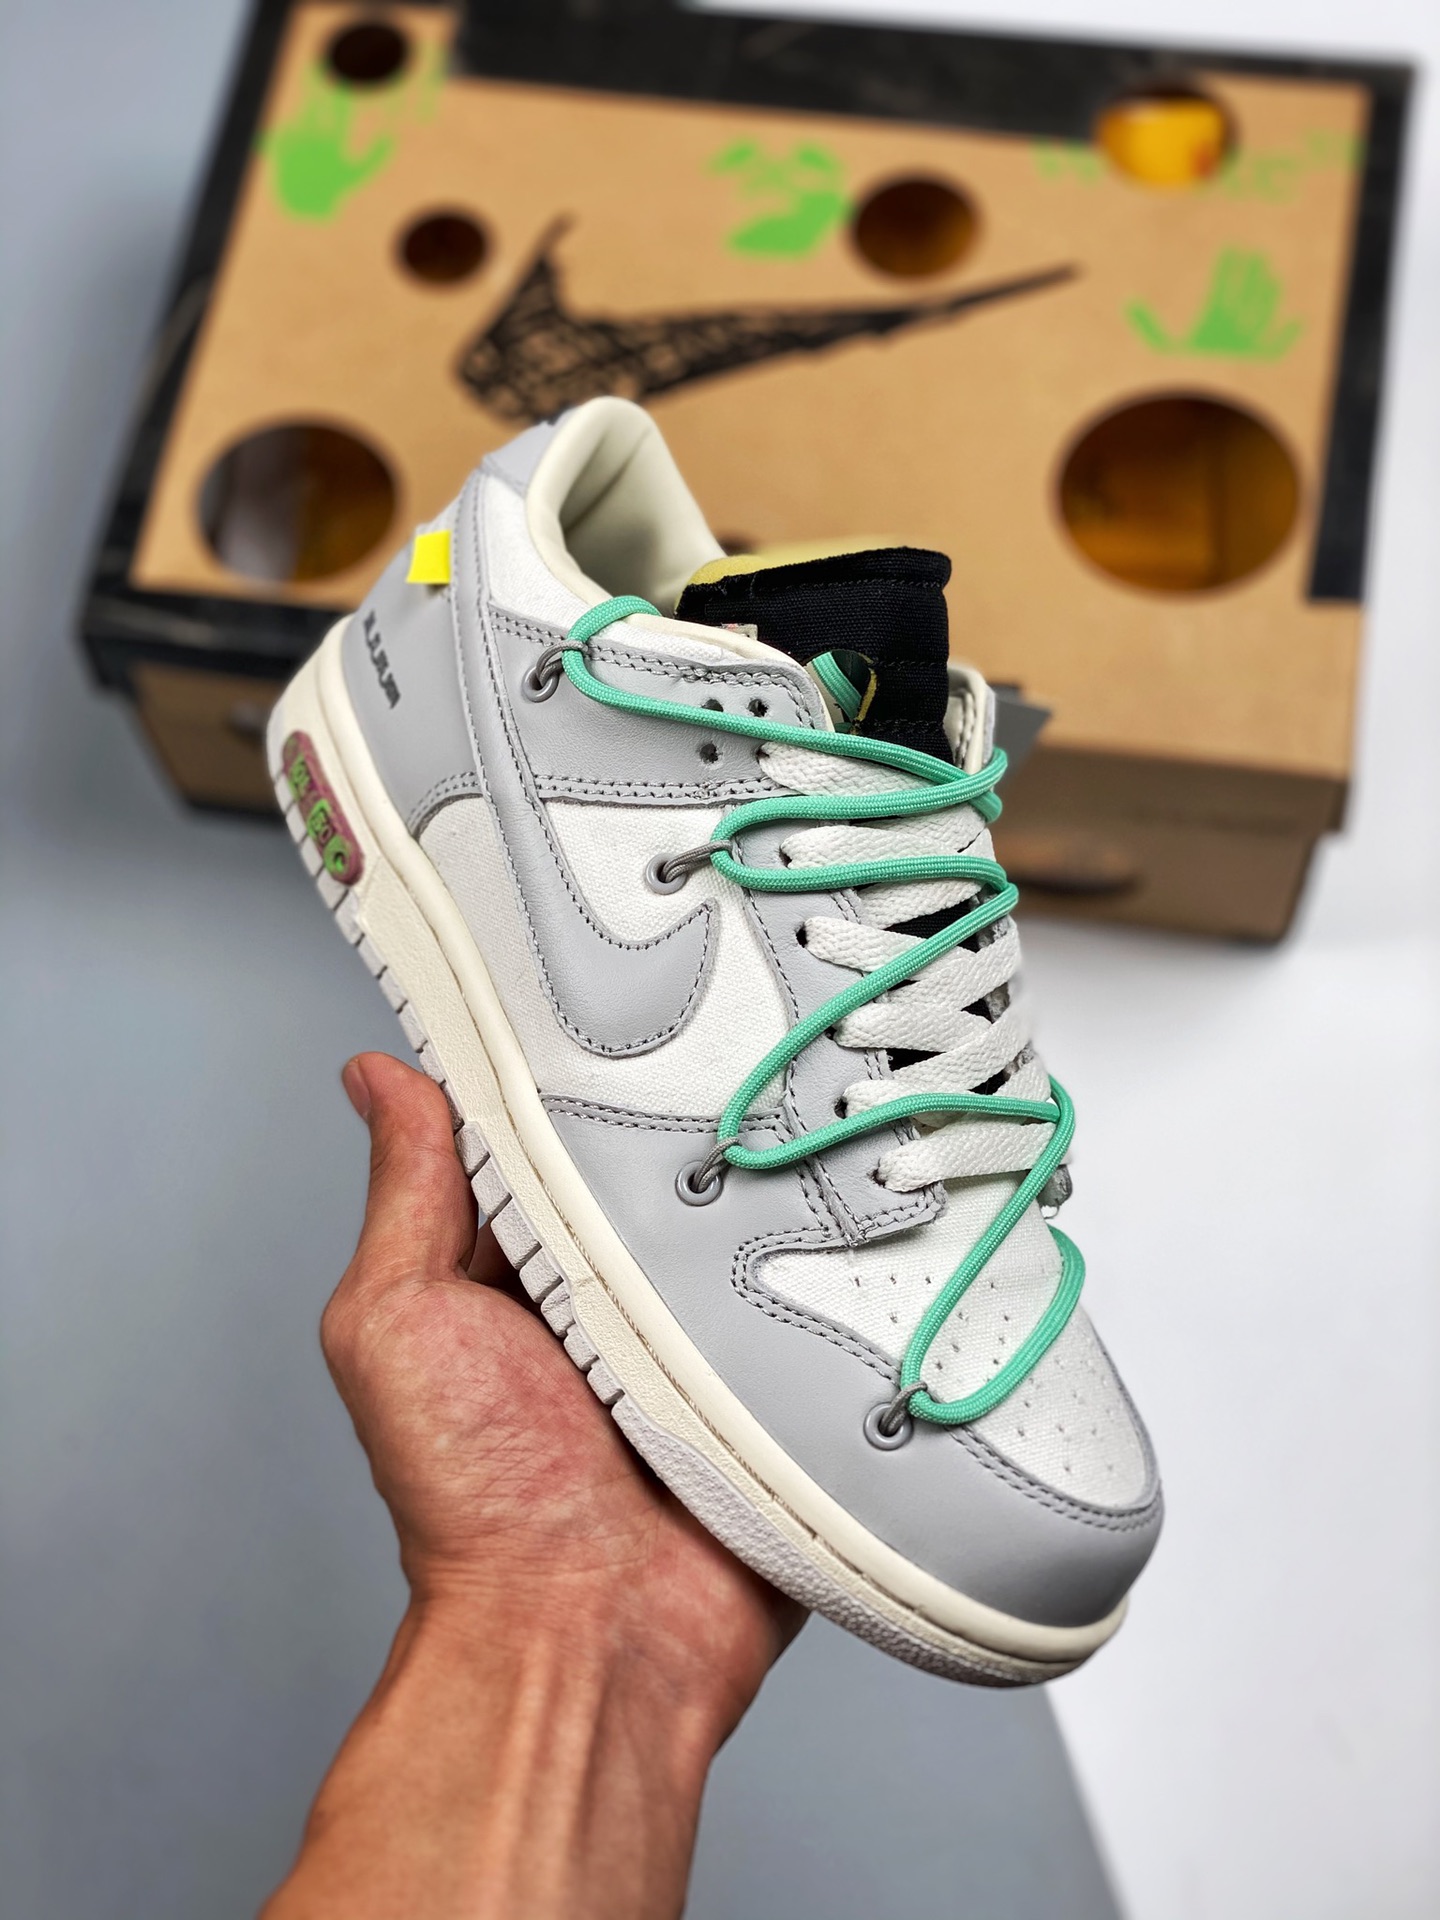 Off-White x Nike Dunk Low "04 of 50" Sail Grey Black Shoes